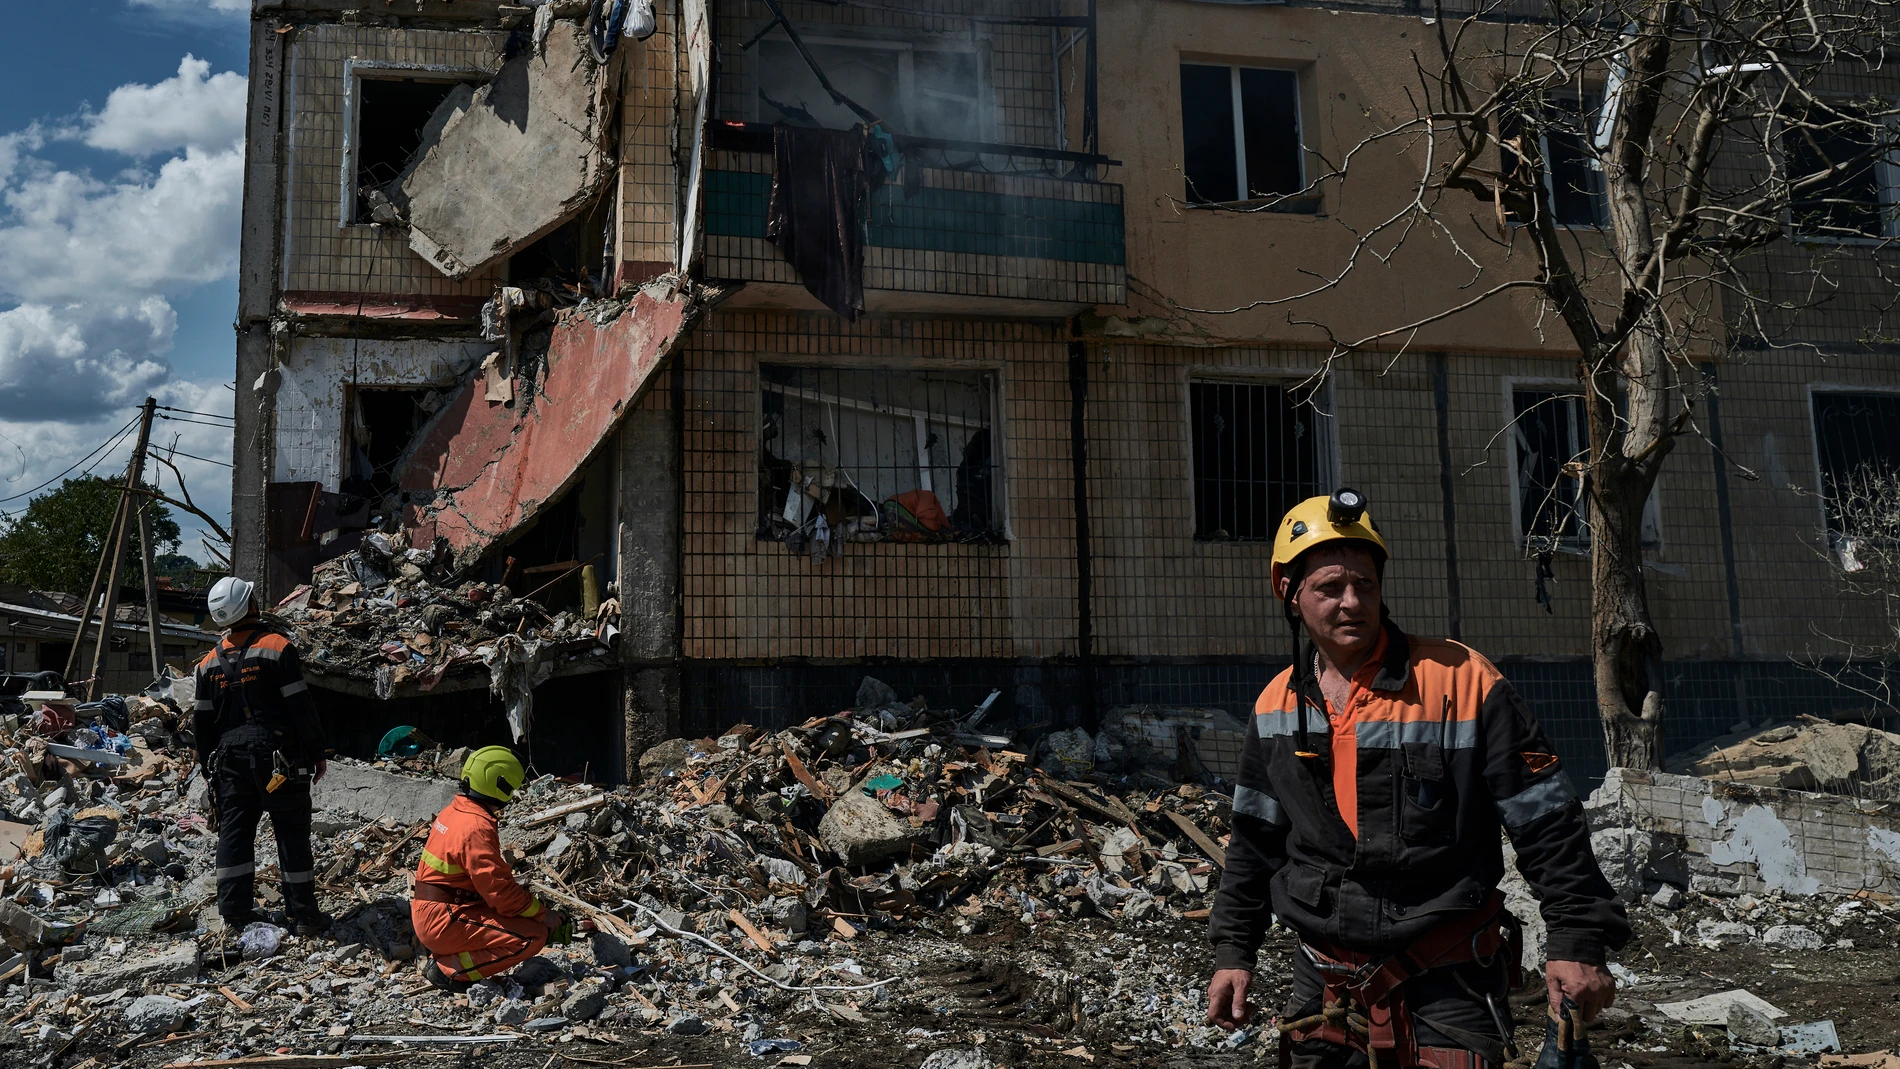 Emergency services work at a scene after a missile hit an apartment building in Kryvyi Rih, Ukraine, Monday, July 31, 2023. (AP Photo/Libkos)